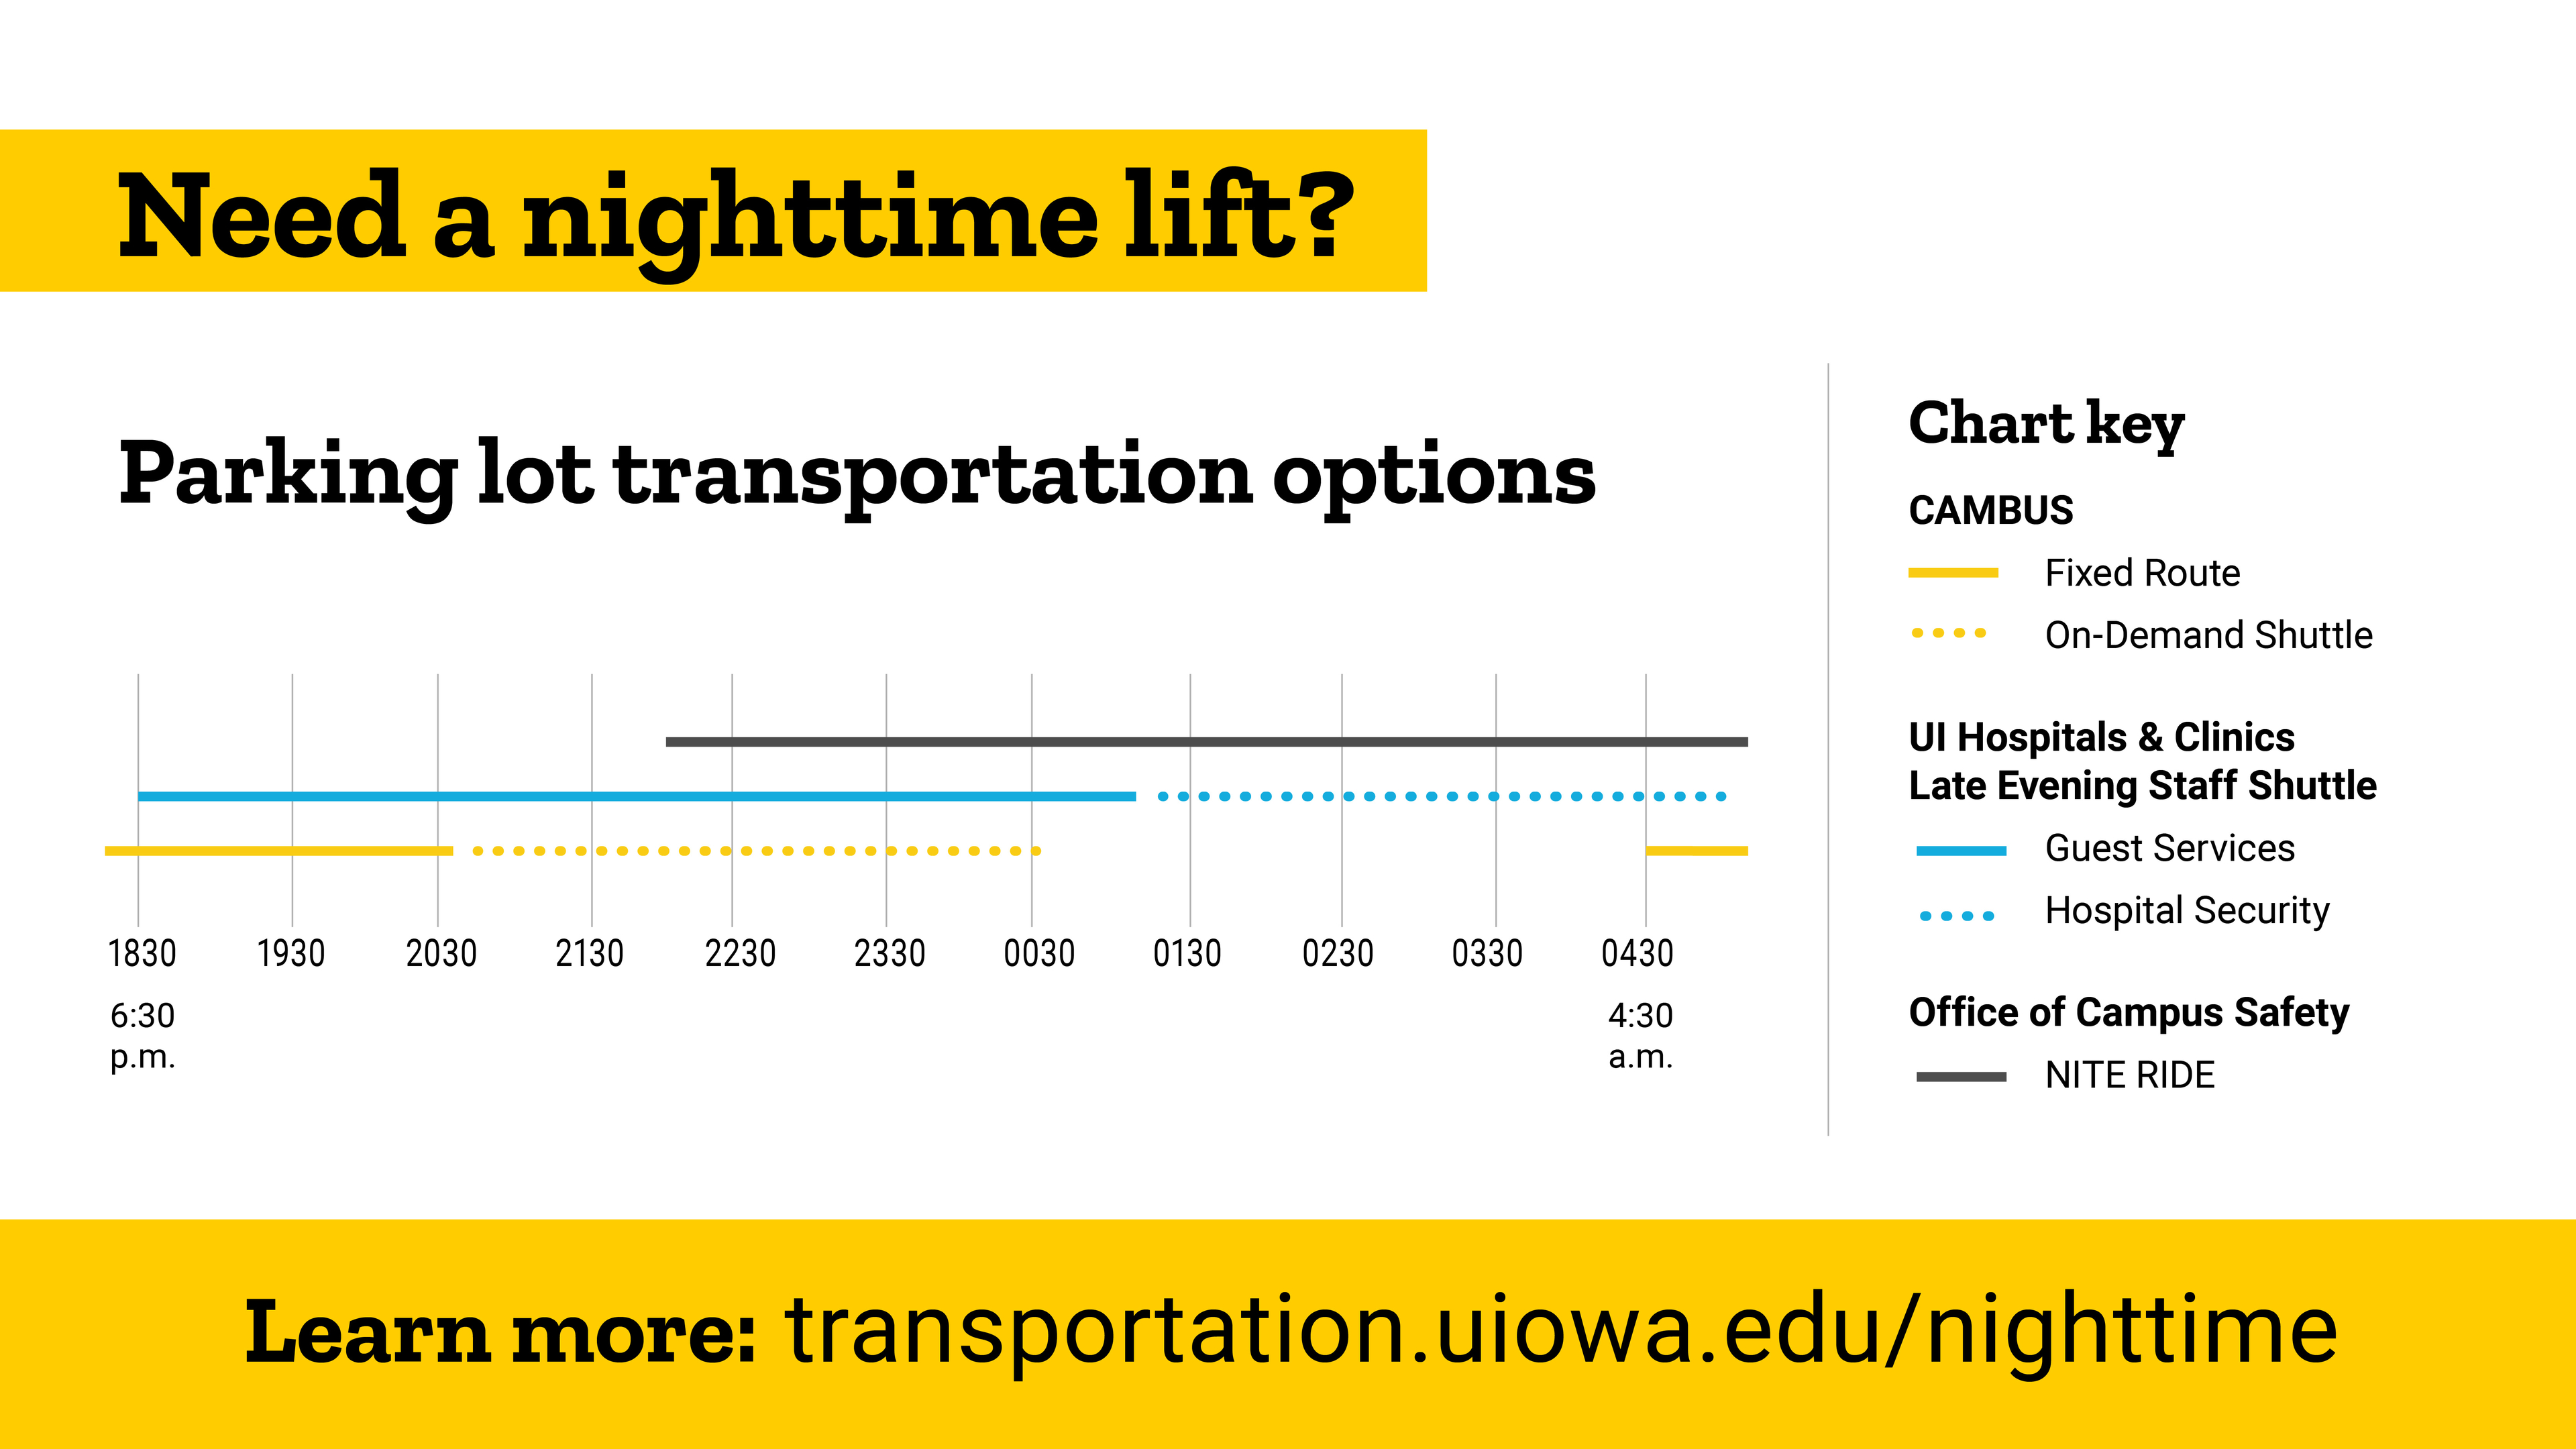 A timeline that displays options for night transportation to parking lots